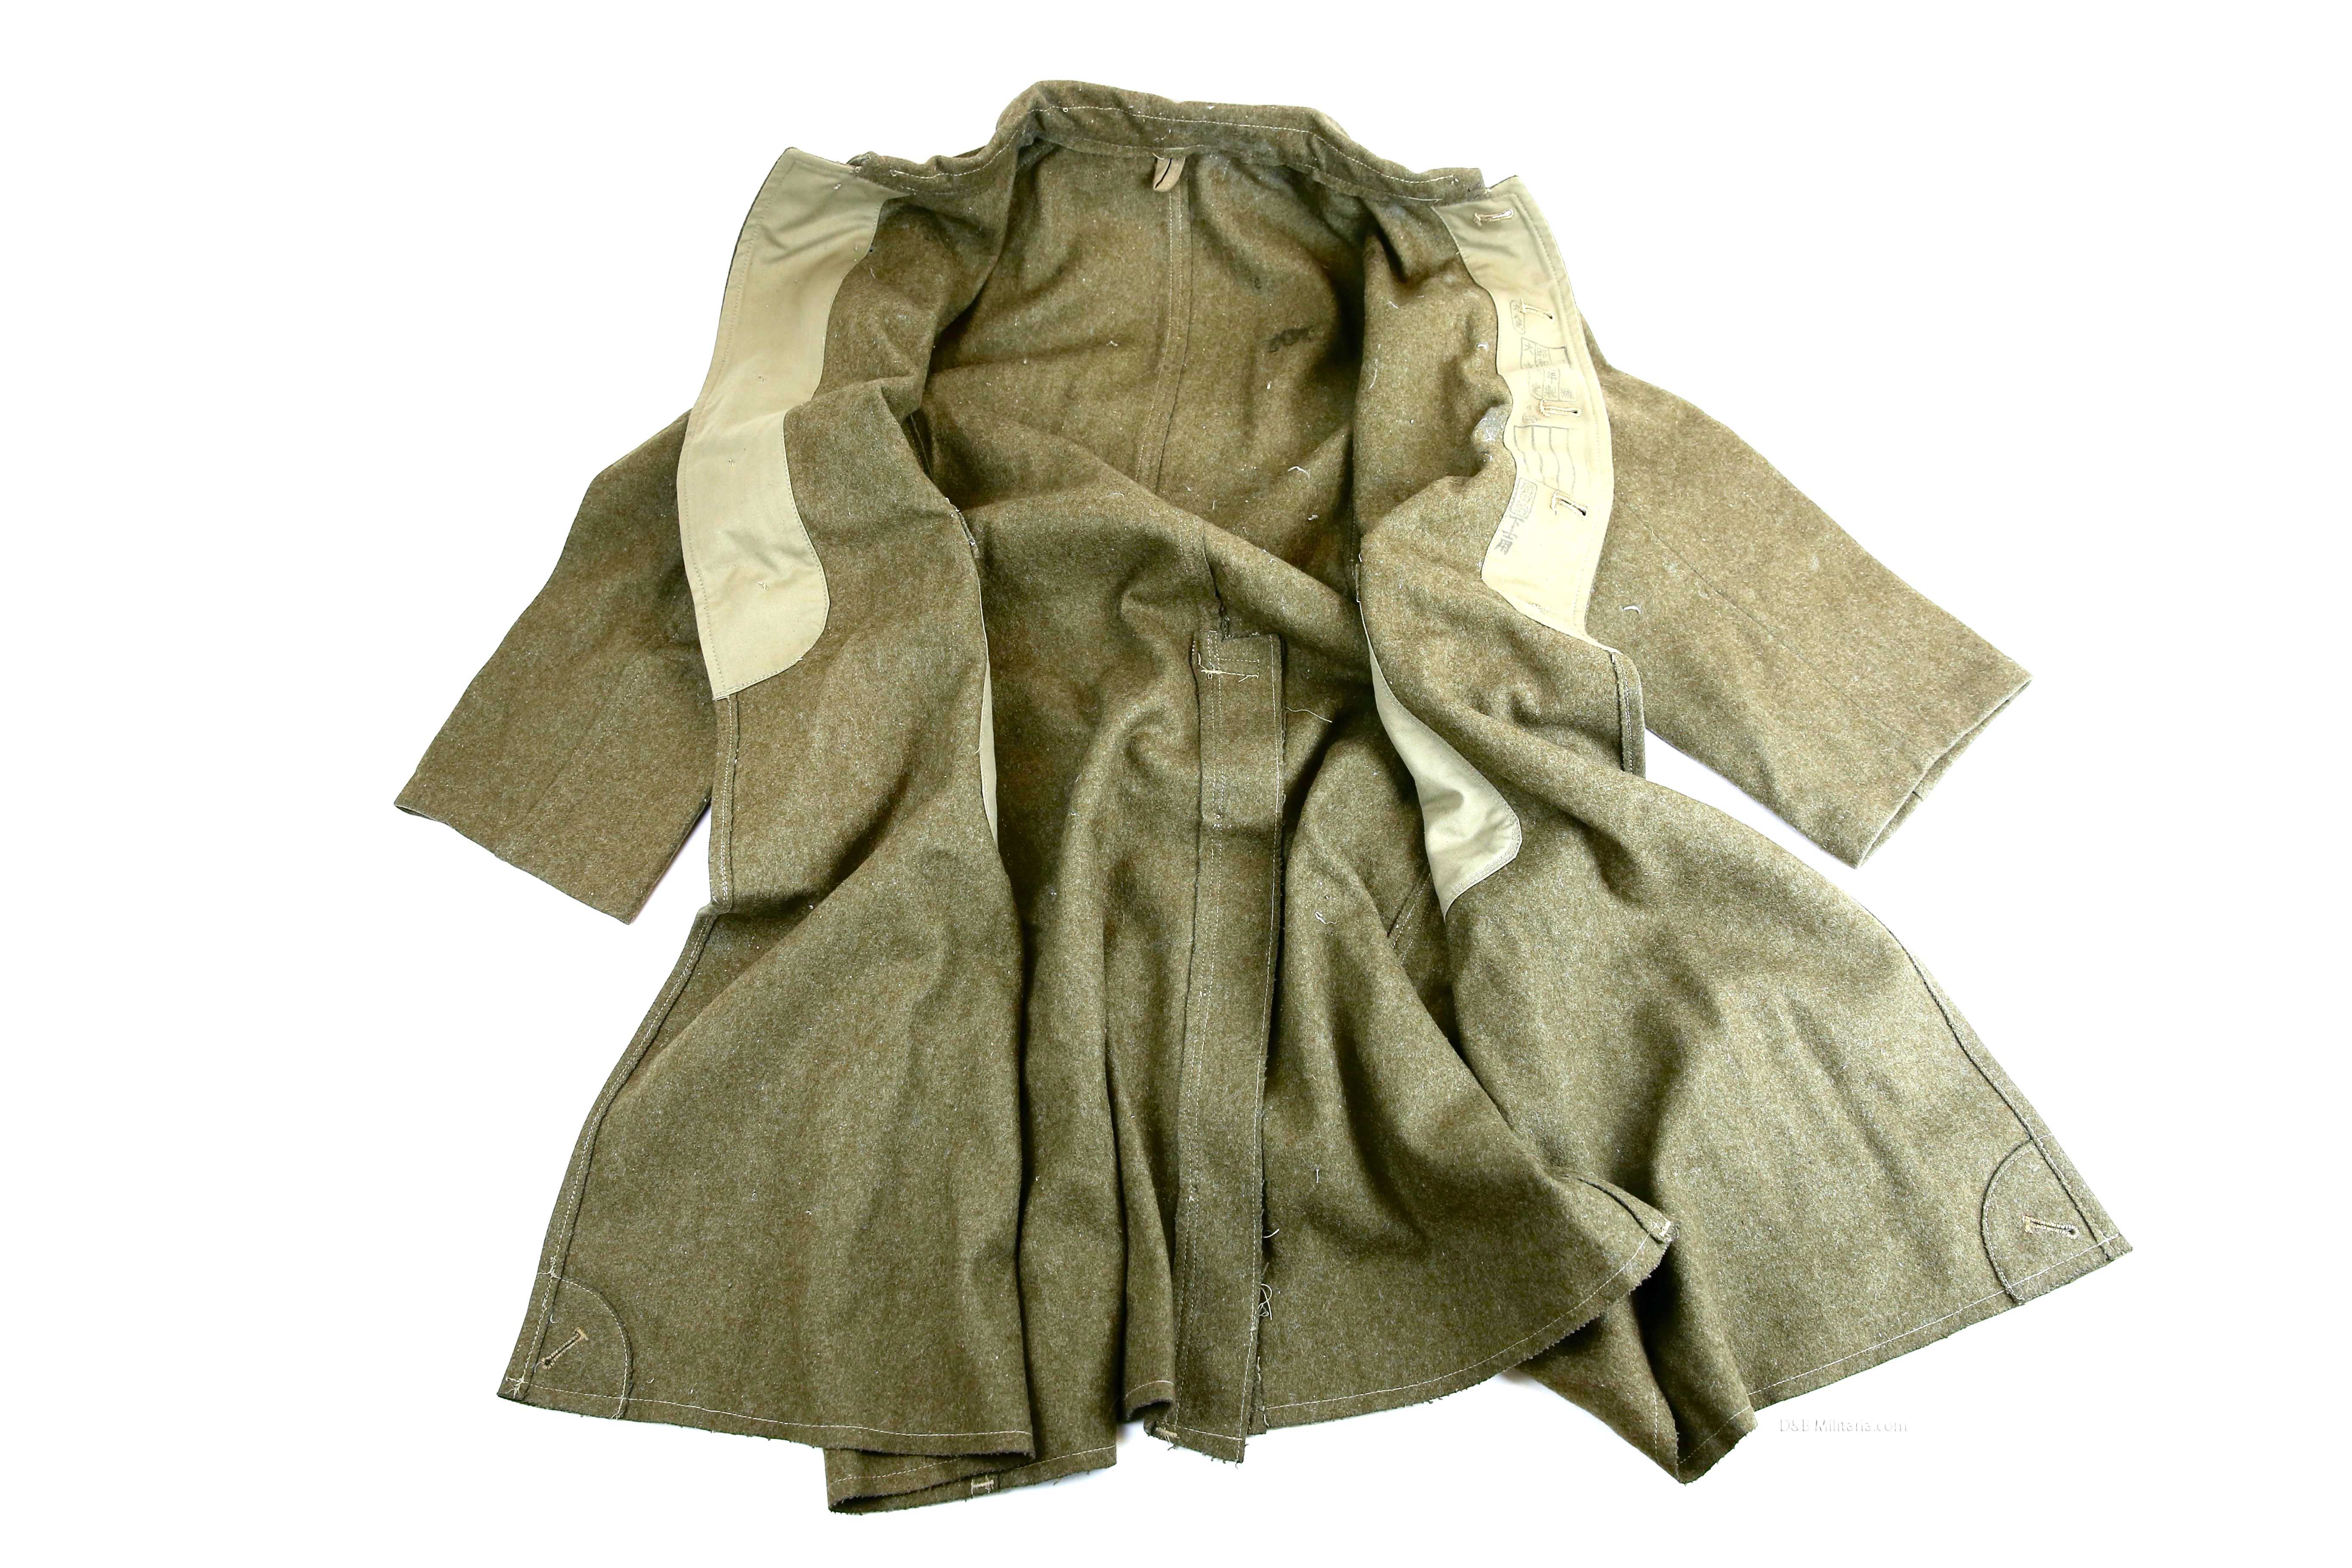 Japanese Army Great Coat